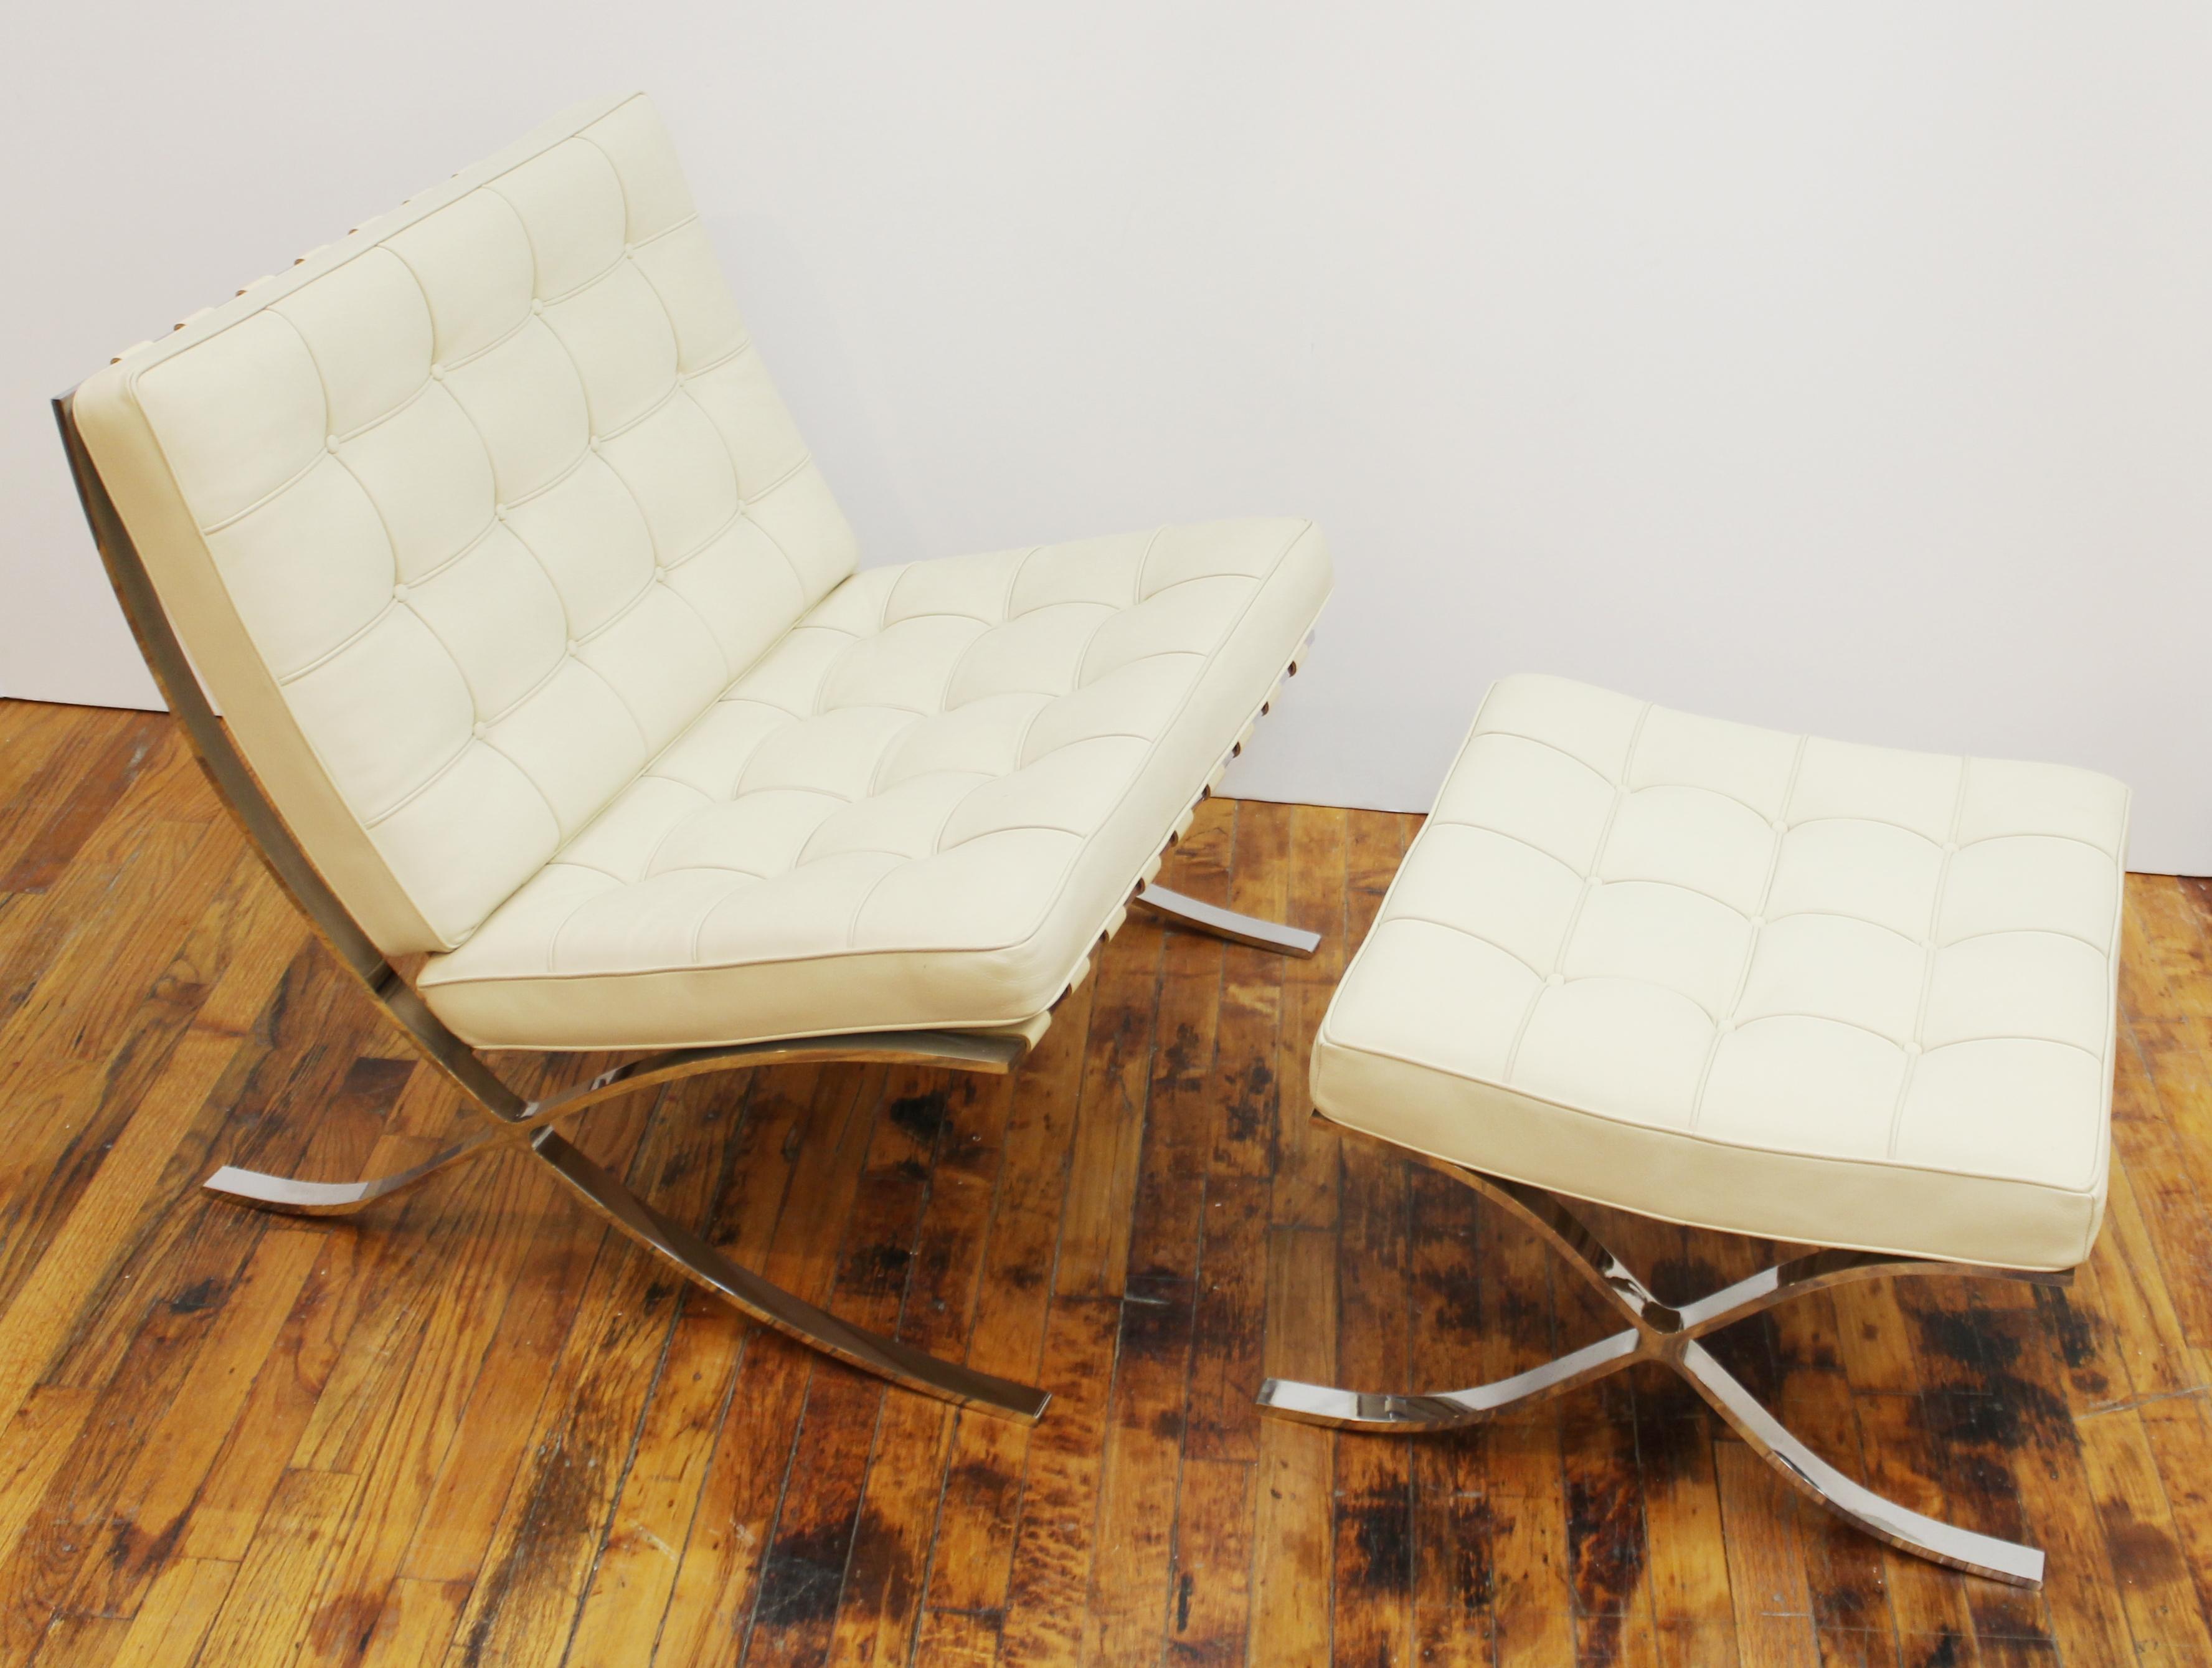 Modern Barcelona style lounge chair and ottoman set, upholstered in cream leather. In good vintage condition, with some minor blemishes in the leather.